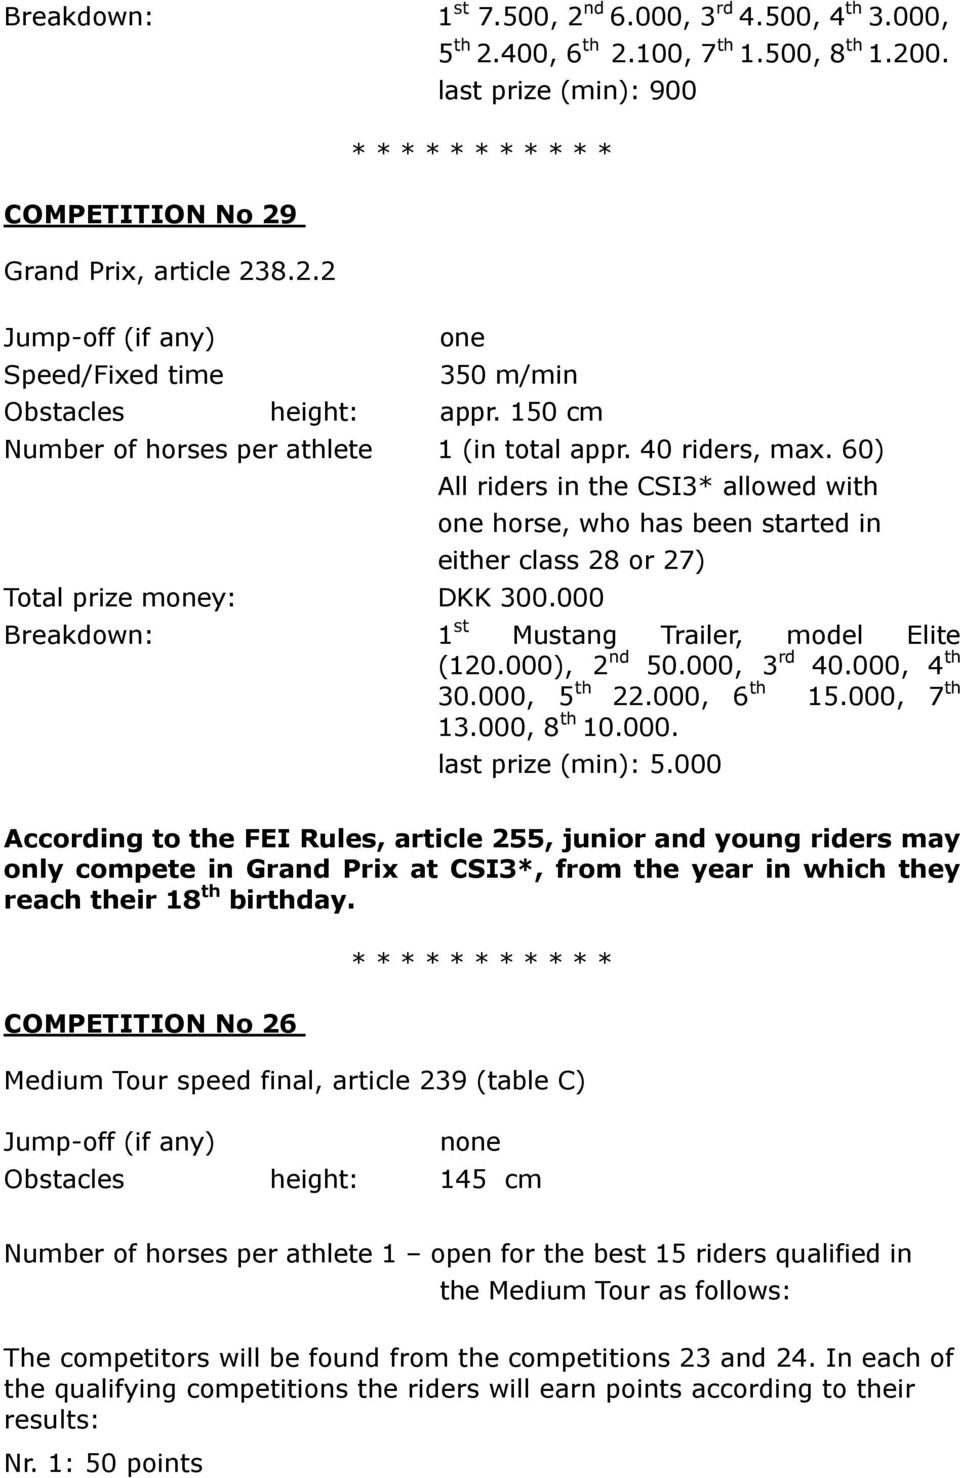 60) All riders in the CSI3* allowed with one horse, who has been started in either class 28 or 27) Total prize money: DKK 300.000 Breakdown: 1 st Mustang Trailer, model Elite (120.000), 2 nd 50.